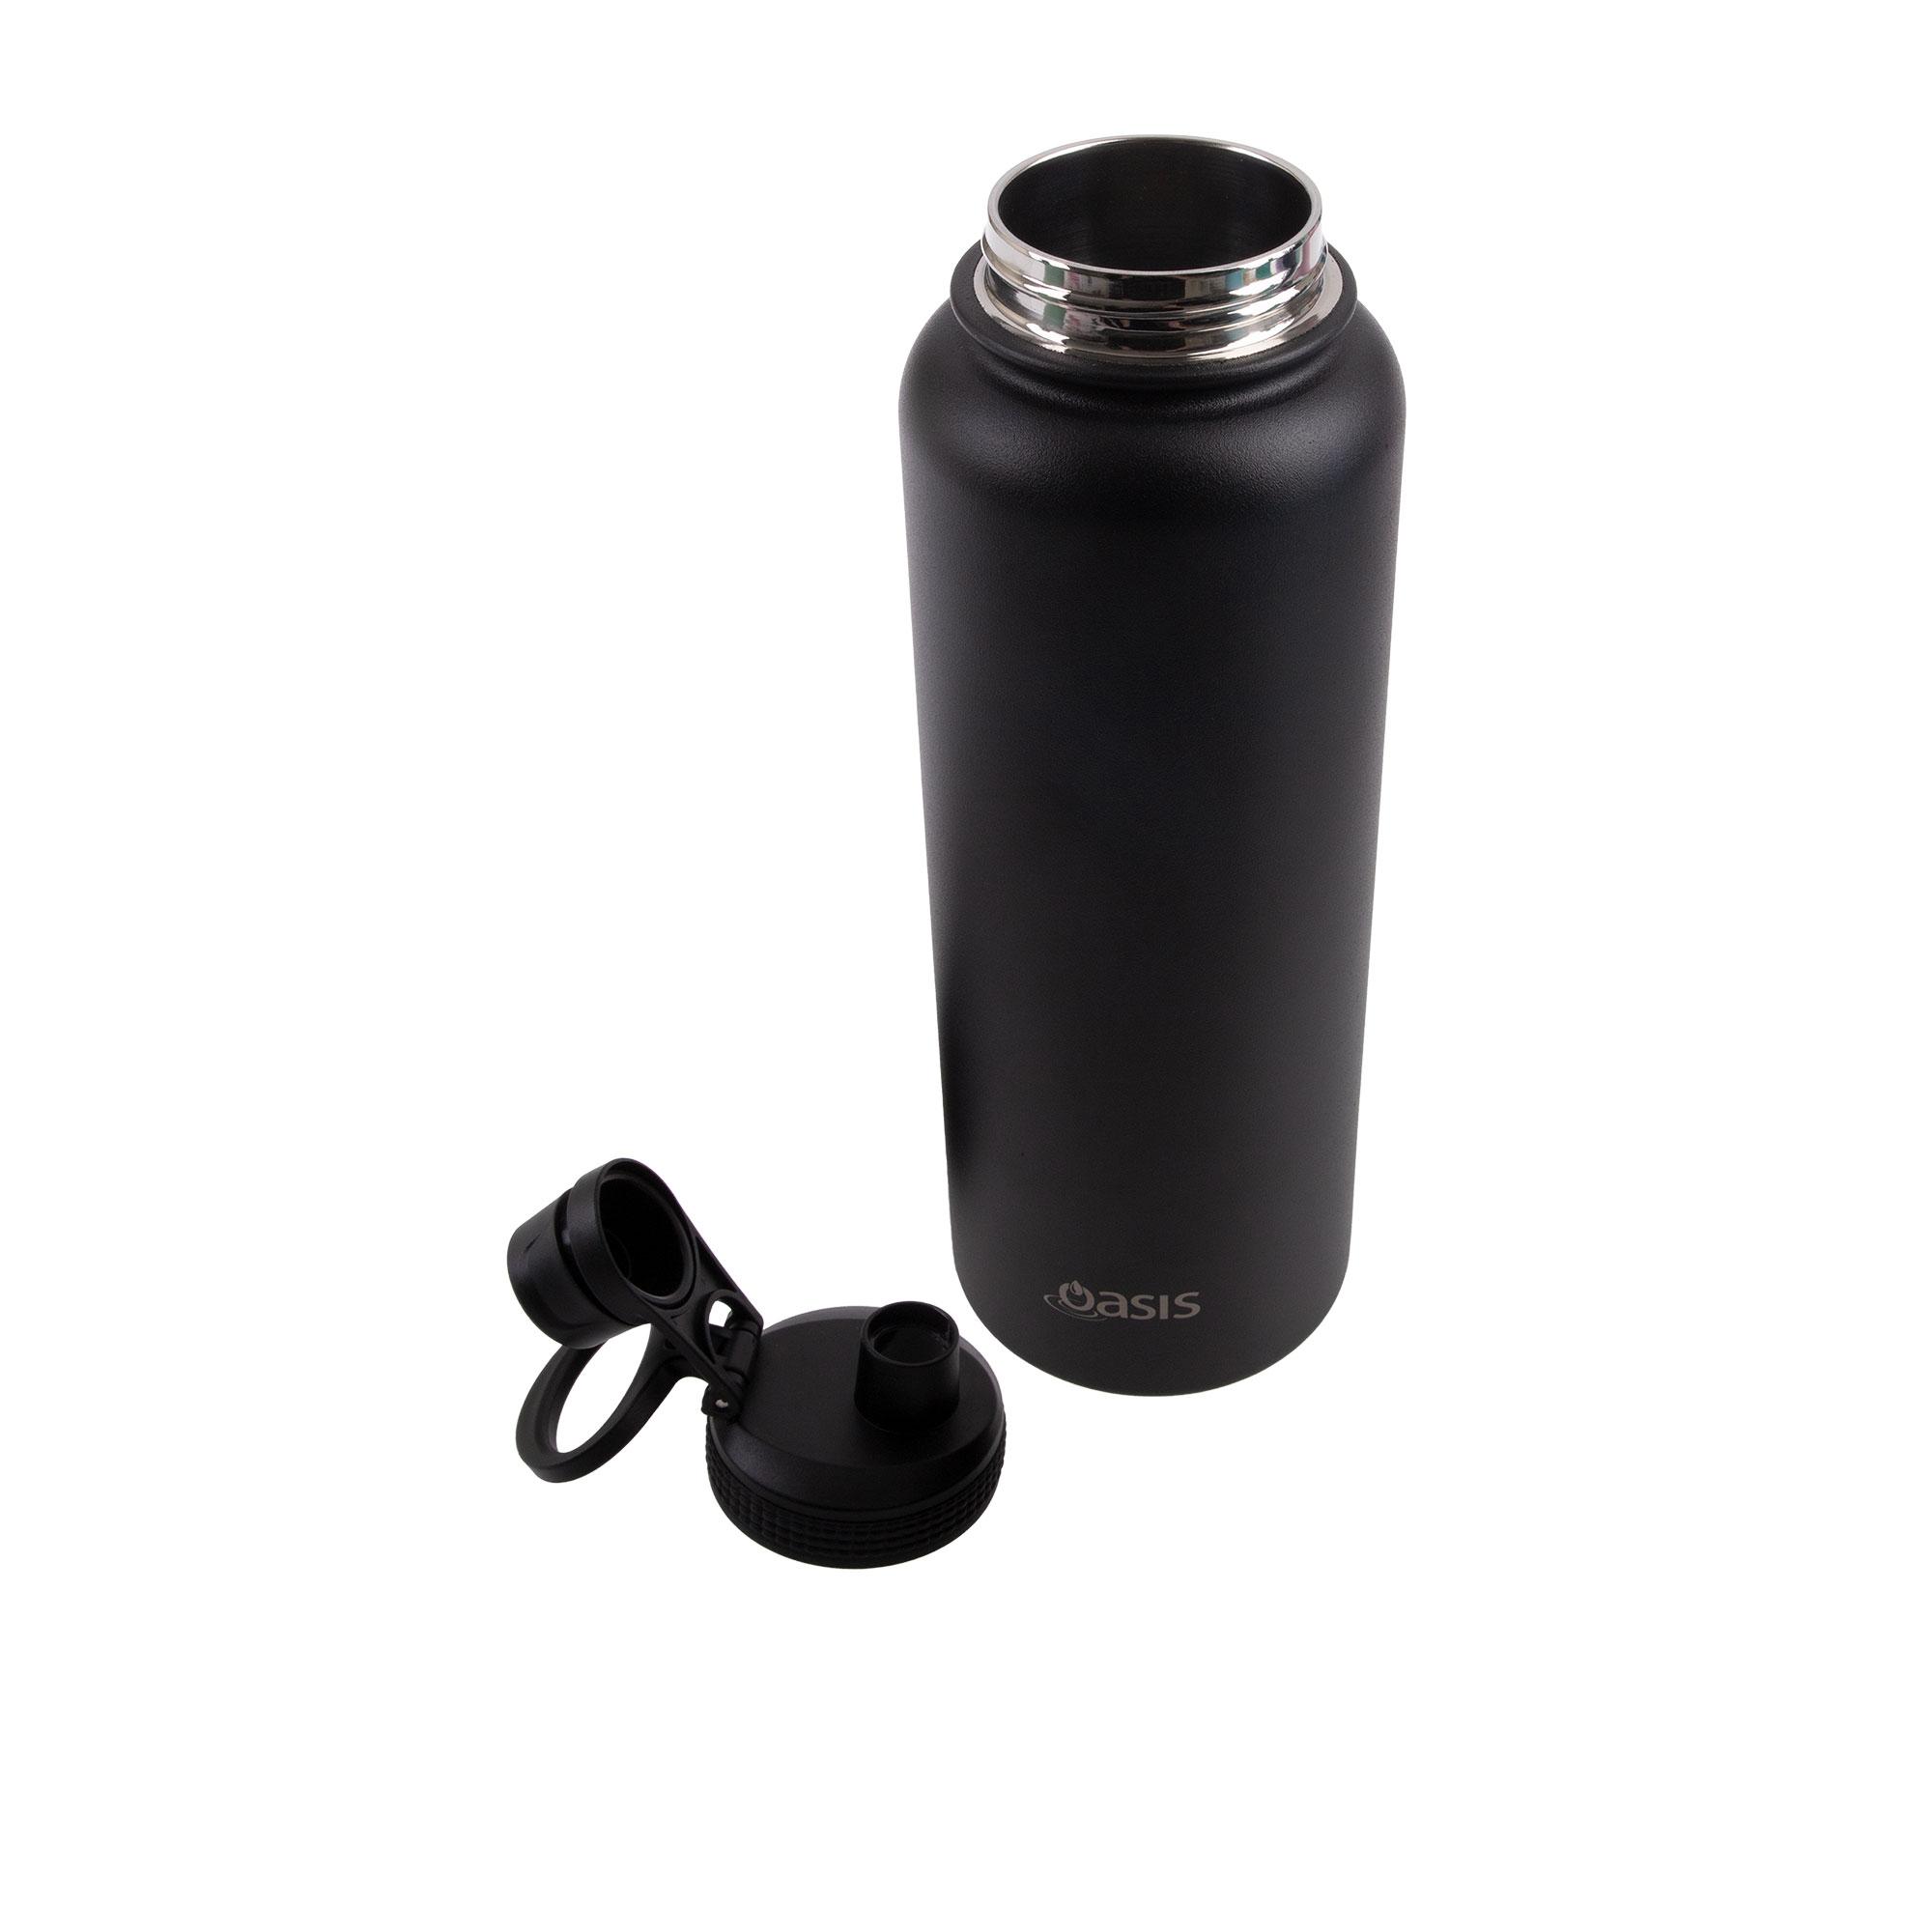 Oasis Challenger Double Wall Insulated Sports Bottle 1.1L Black Image 3